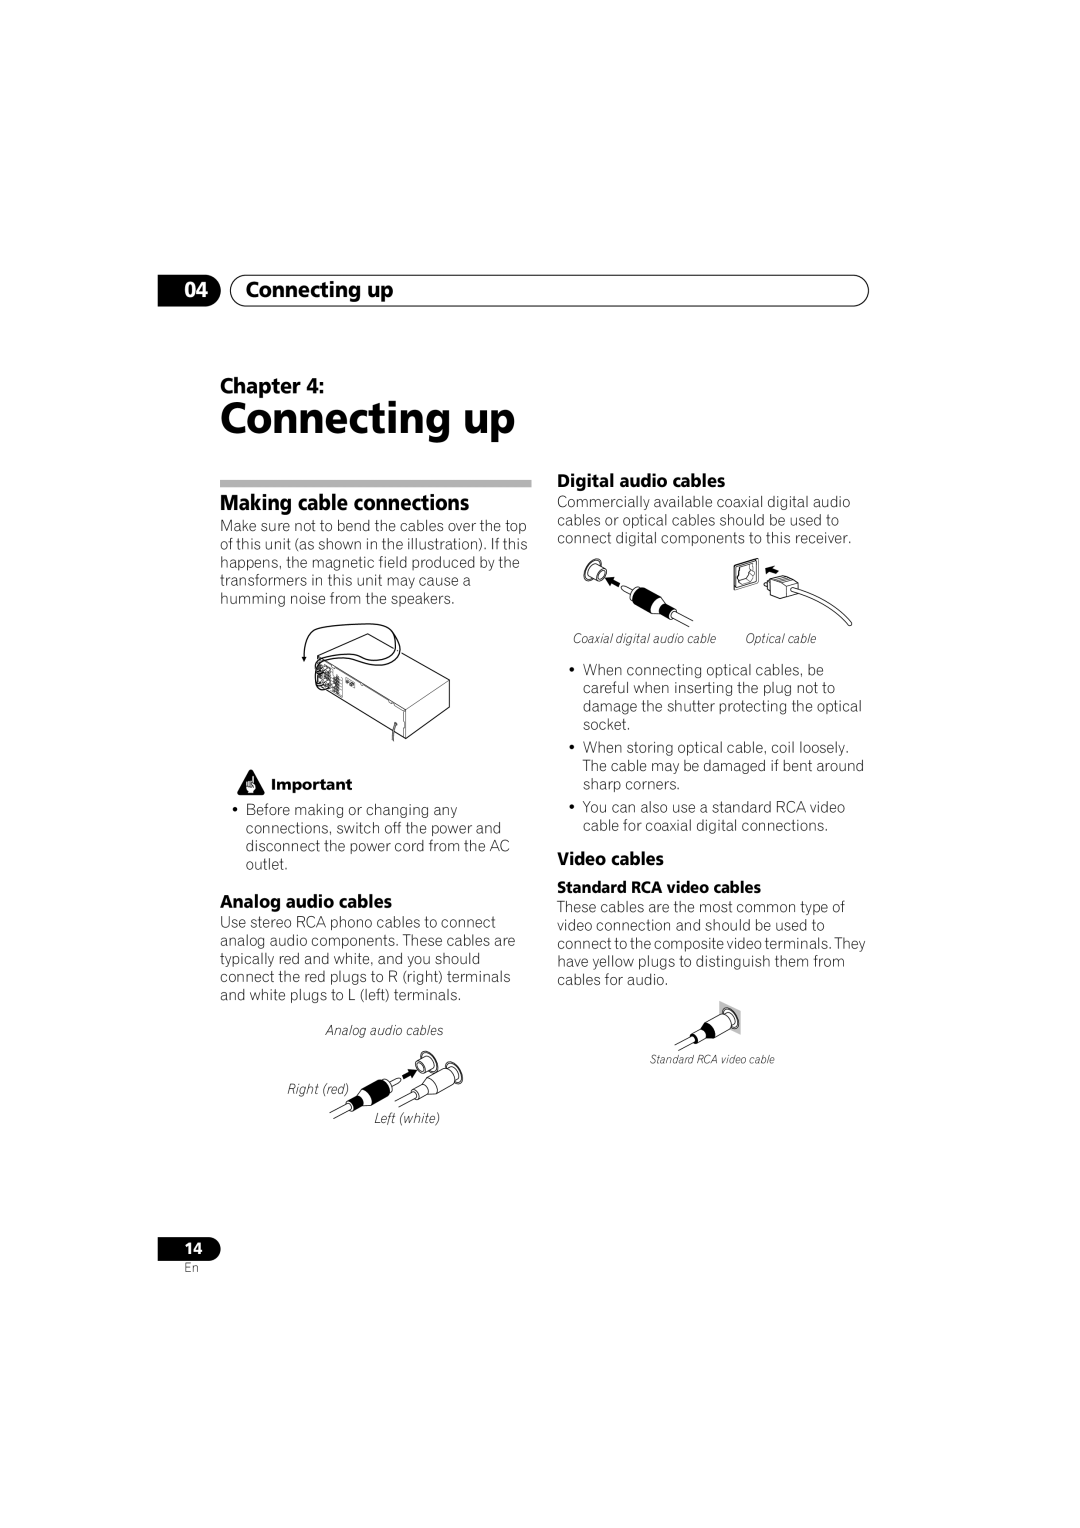 Pioneer VSX-915-S/-K 04Connecting up Chapter, Making cable connections, Analog audio cables, Digital audio cables 